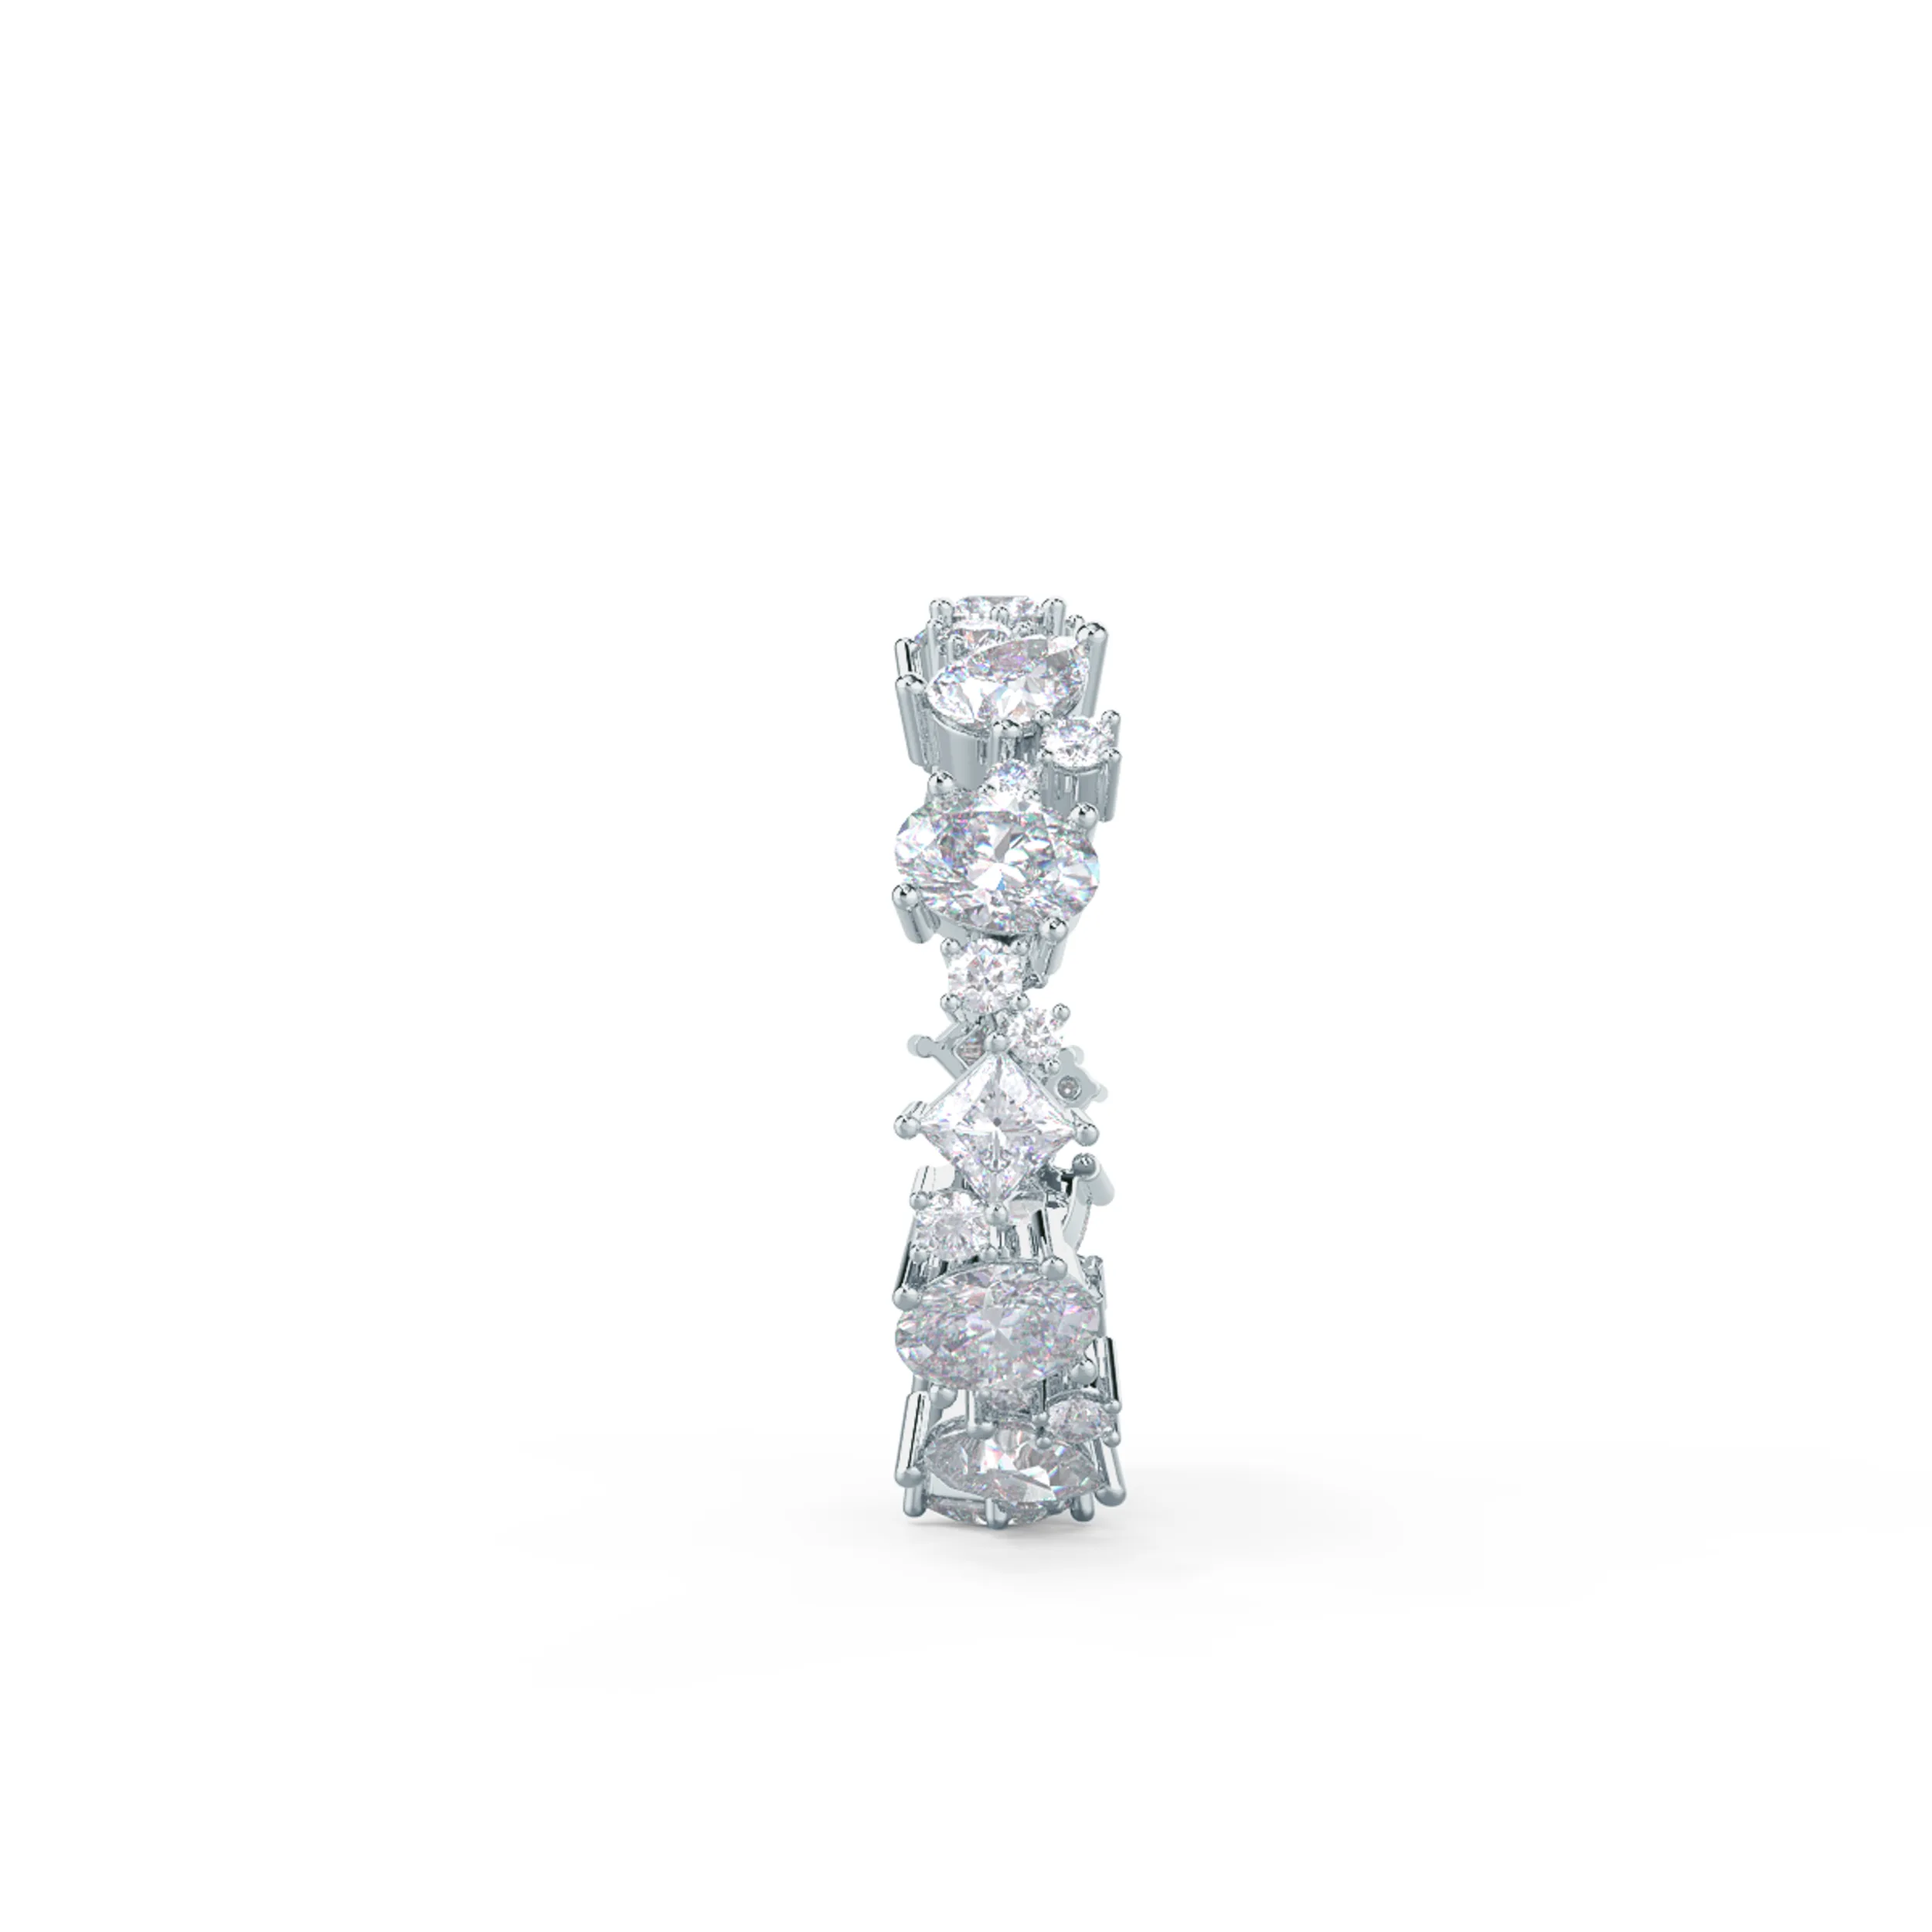 2.0 ct Diamonds set in 18k White Gold Kelsey Eternity Band (Side View)